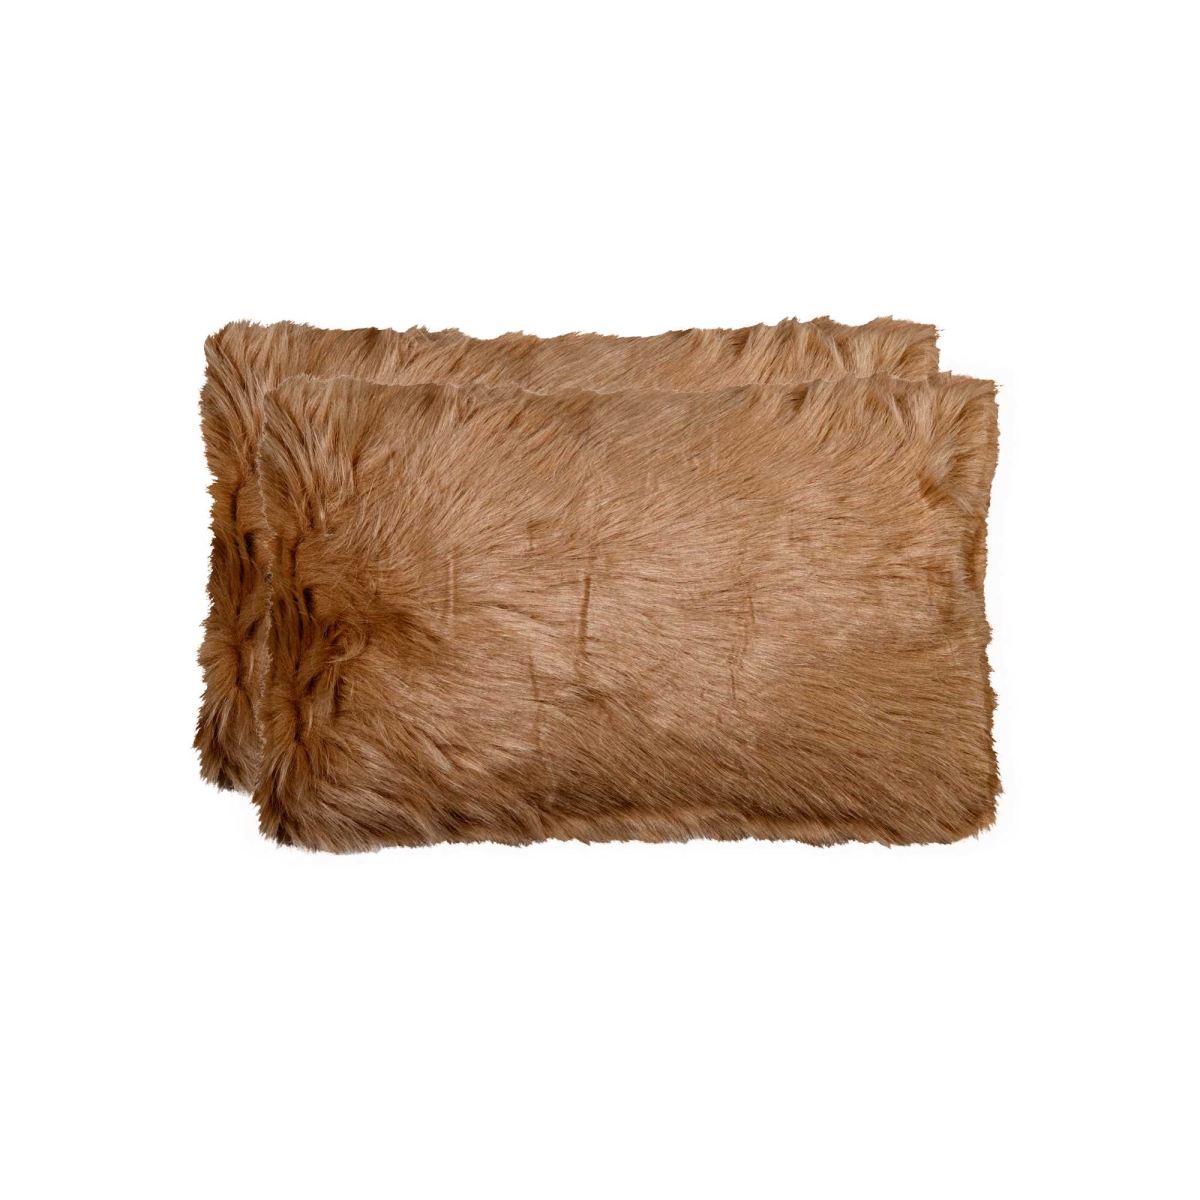 Picture of HomeRoots 317192 12 x 20 in. Fur Pillow, Tan - Pack of 2